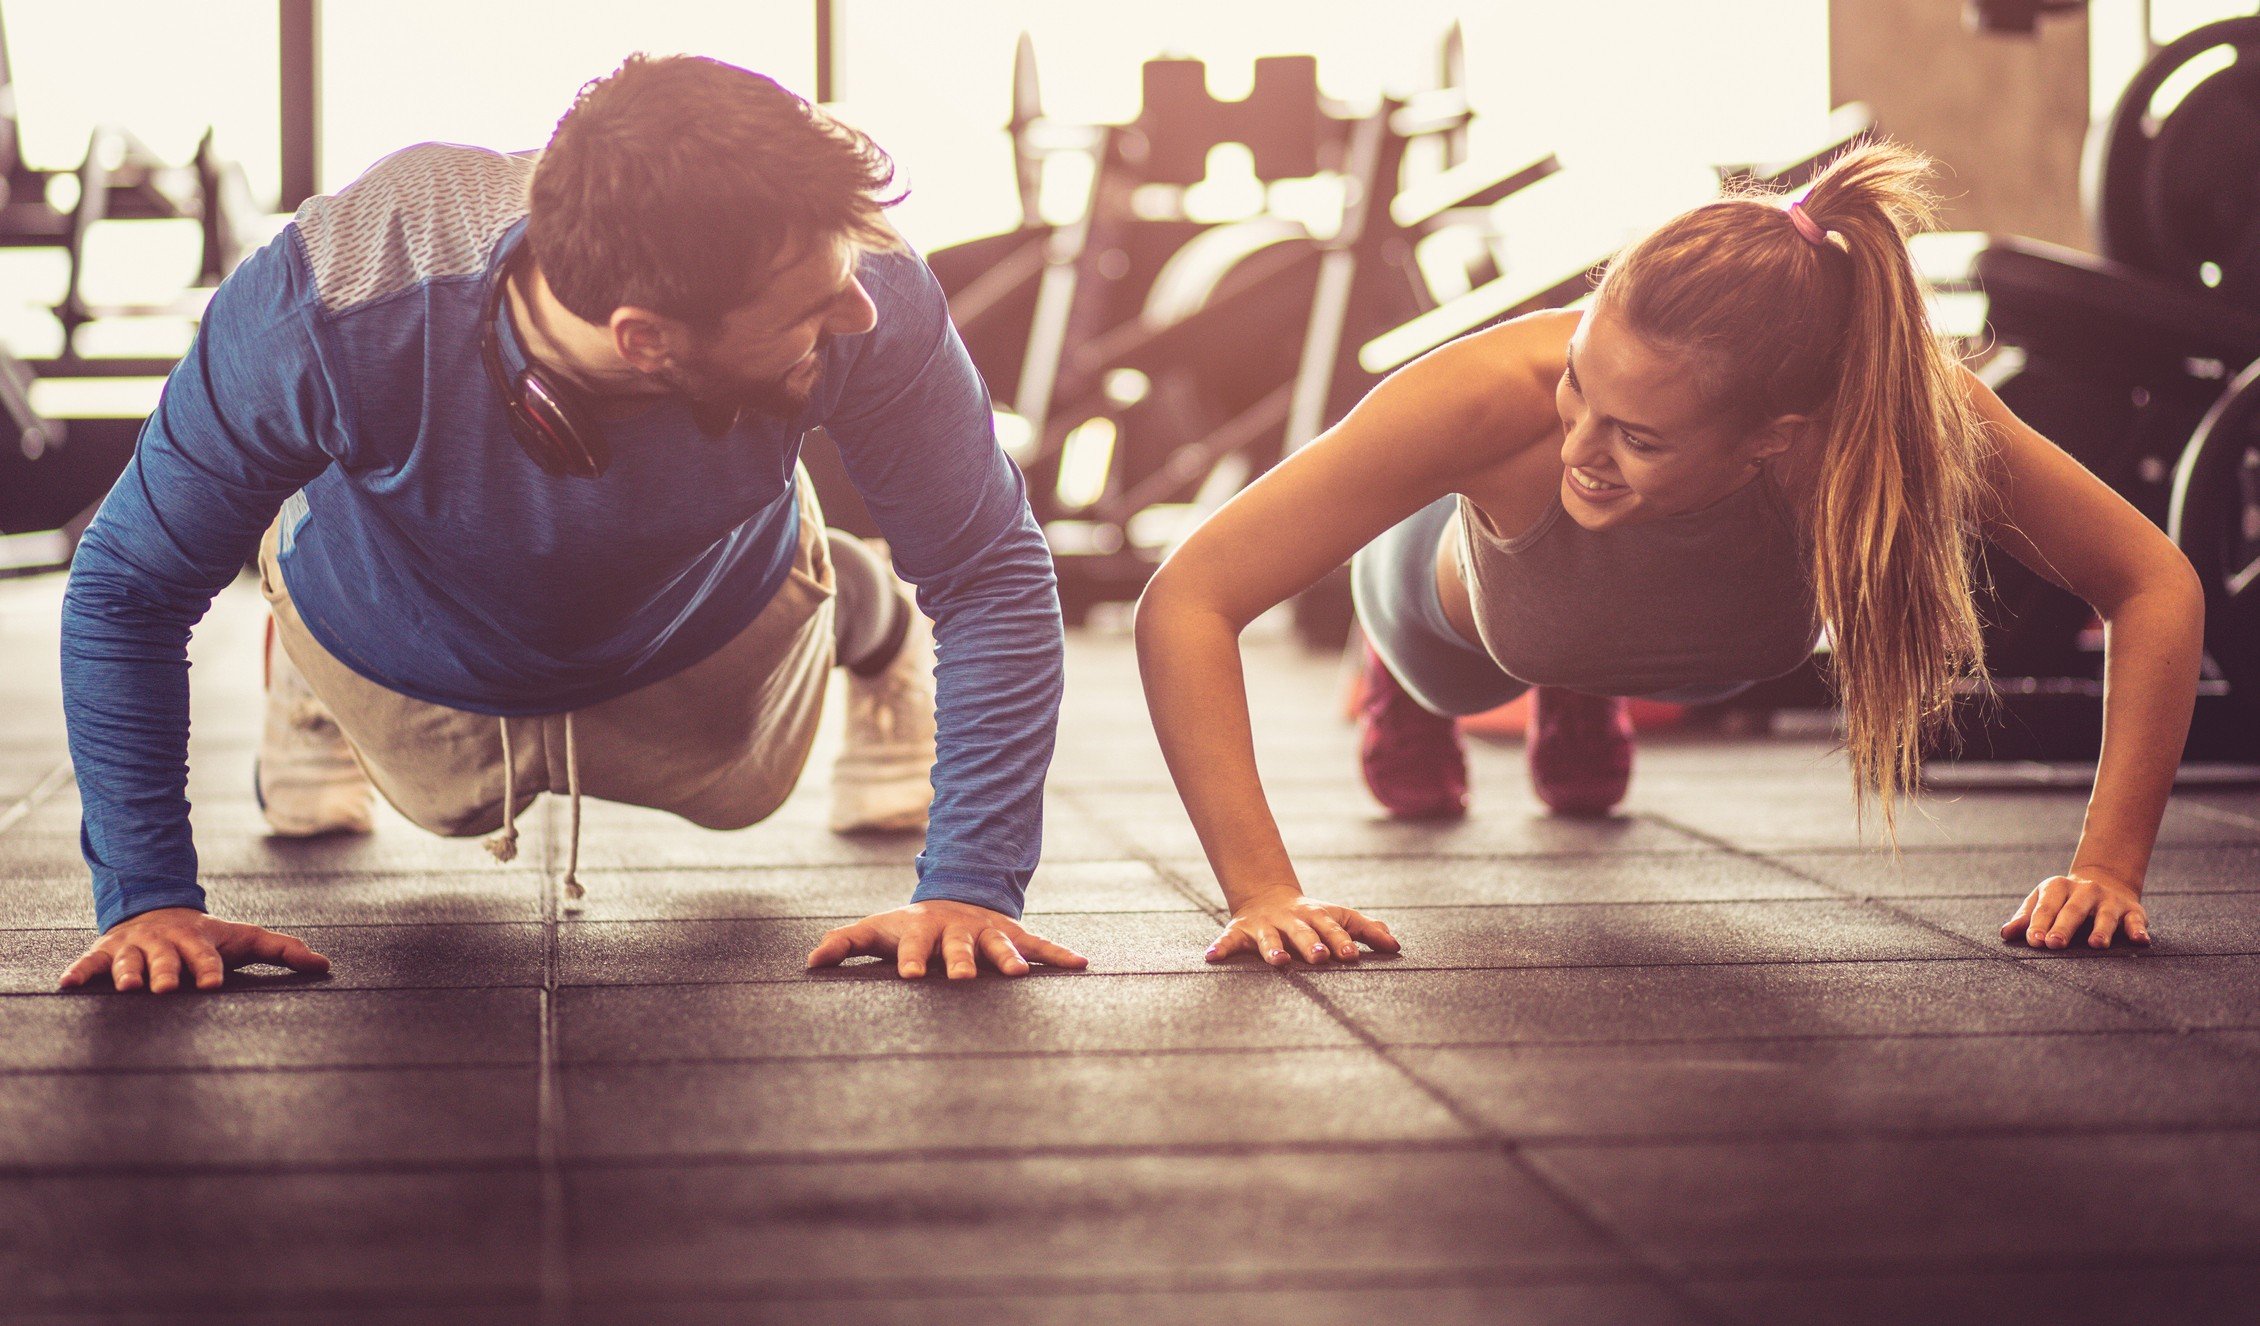 A young couple enjoy themselves while doing push-ups in a gym.